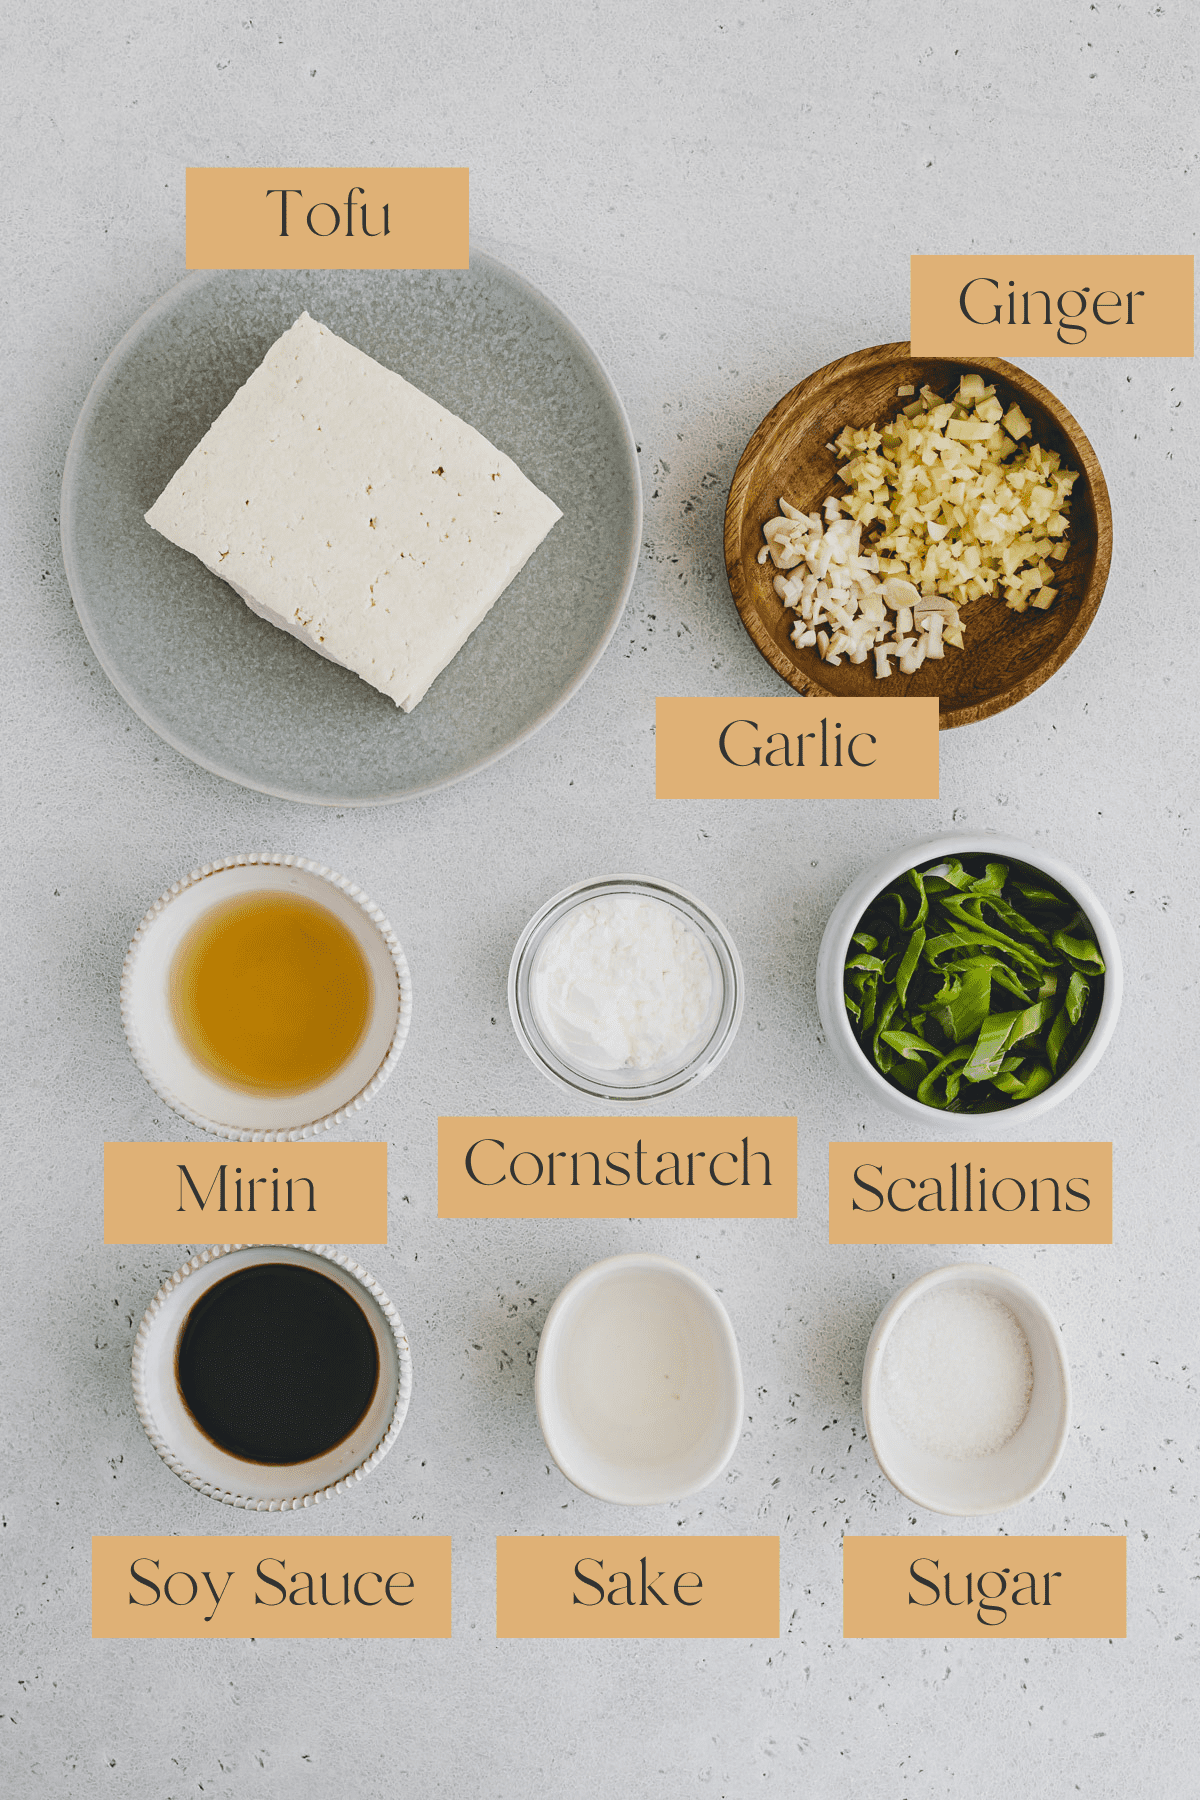 Top view of ingredients in small bowls including tofu, ginger, mirin, cornstarch, scallions, soy sauce, sake and sugar. 